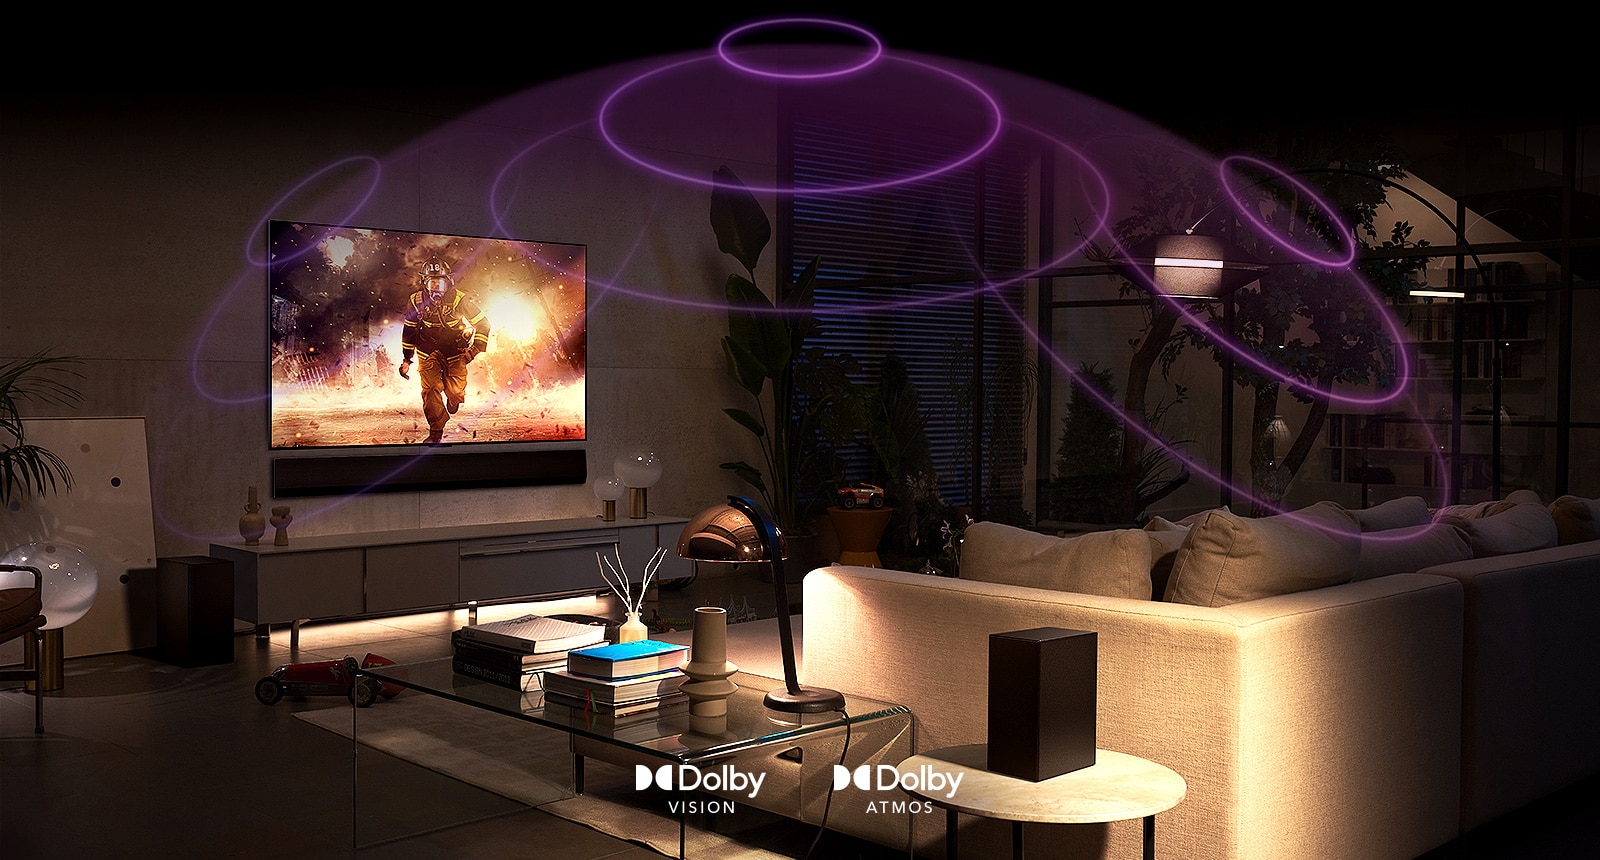 An image of an LG OLED TV in a room playing an action movie. Sound waves create a dome between the sofa and the TV, depicting immersive spatial audio.